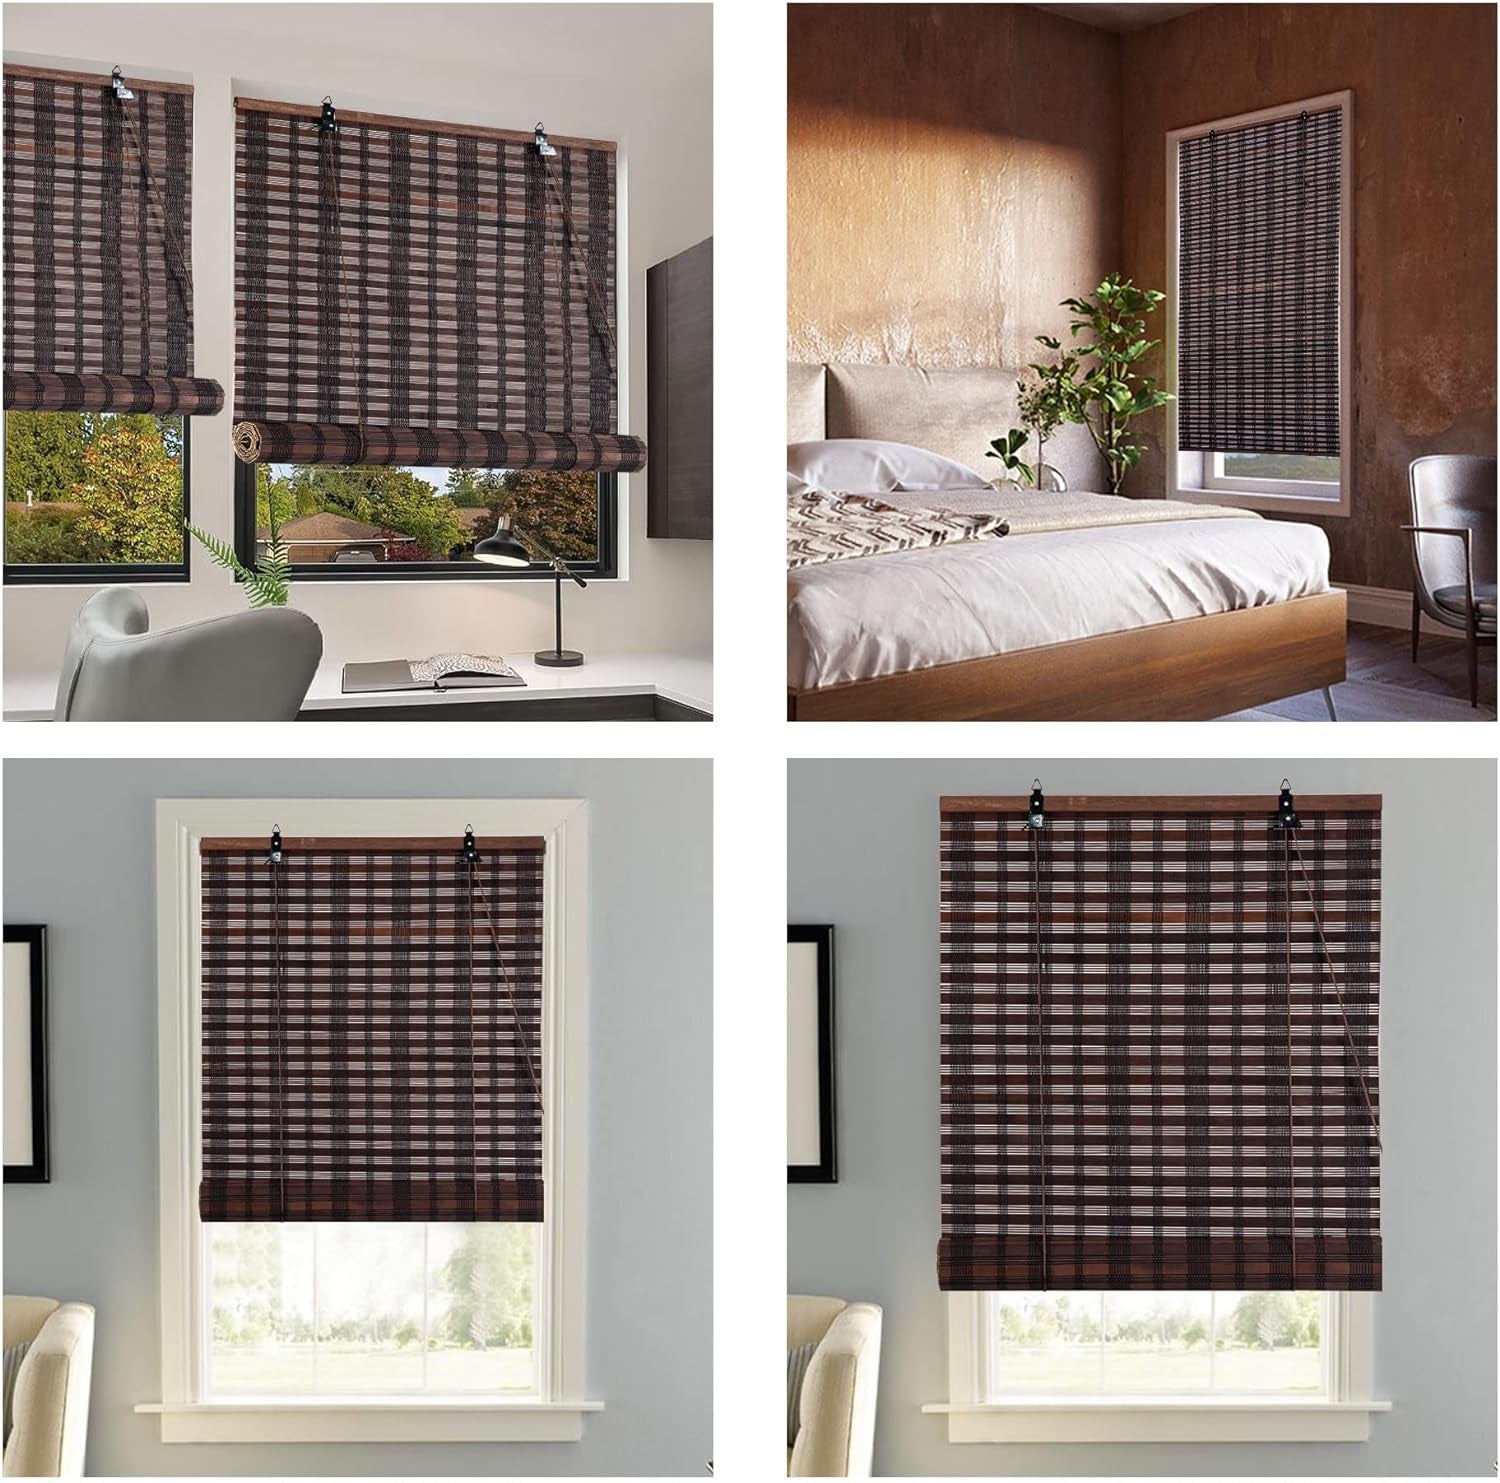 Bamboo Roman Window Blinds Sun Shades, Light Filtering Roller Shades,Any Size 24-72 Wide and 72 High (Dark Brown, 48 * 72)